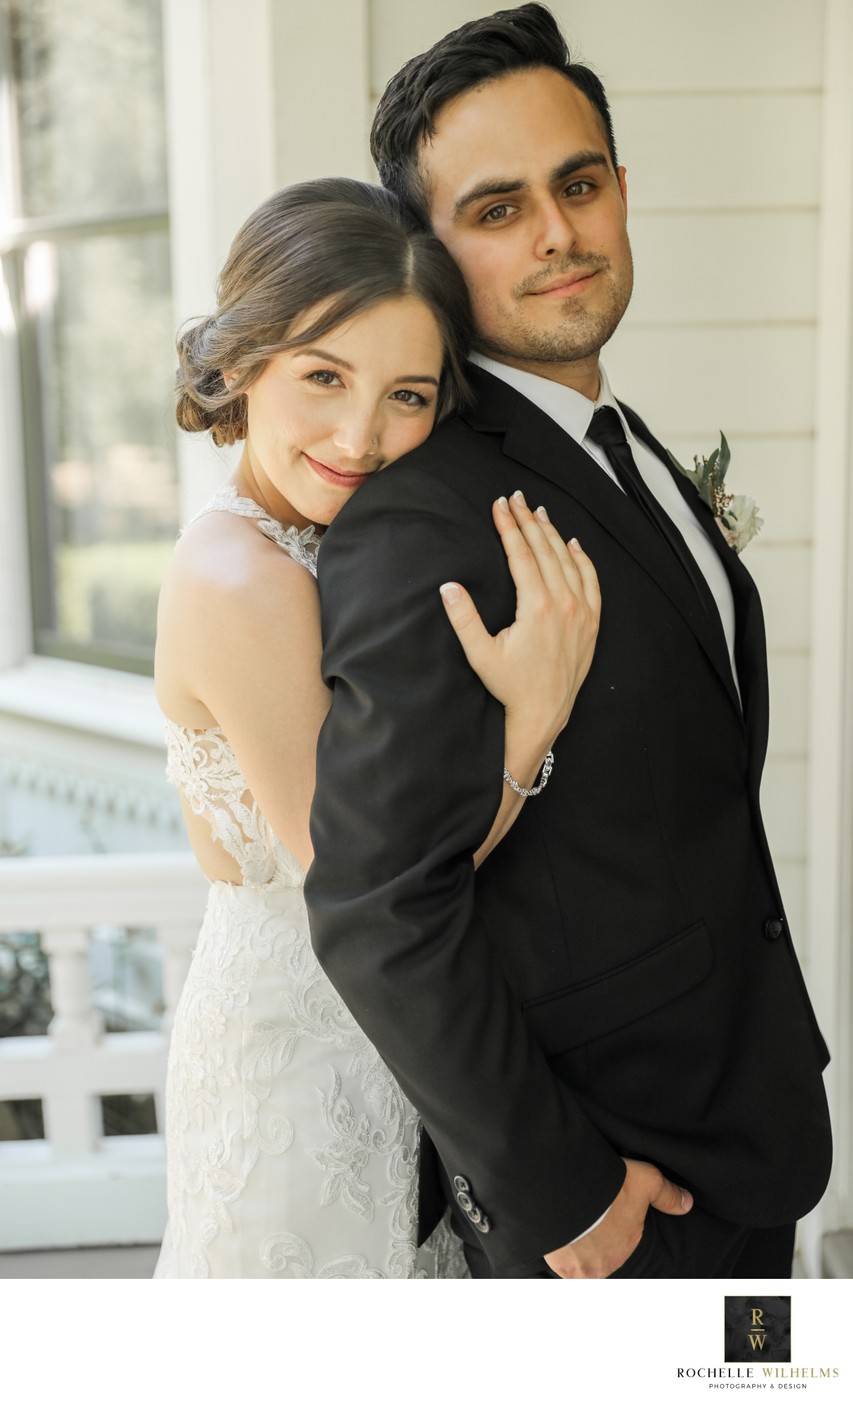 Best Wedding Photography at Joyful Ranch in Vacaville